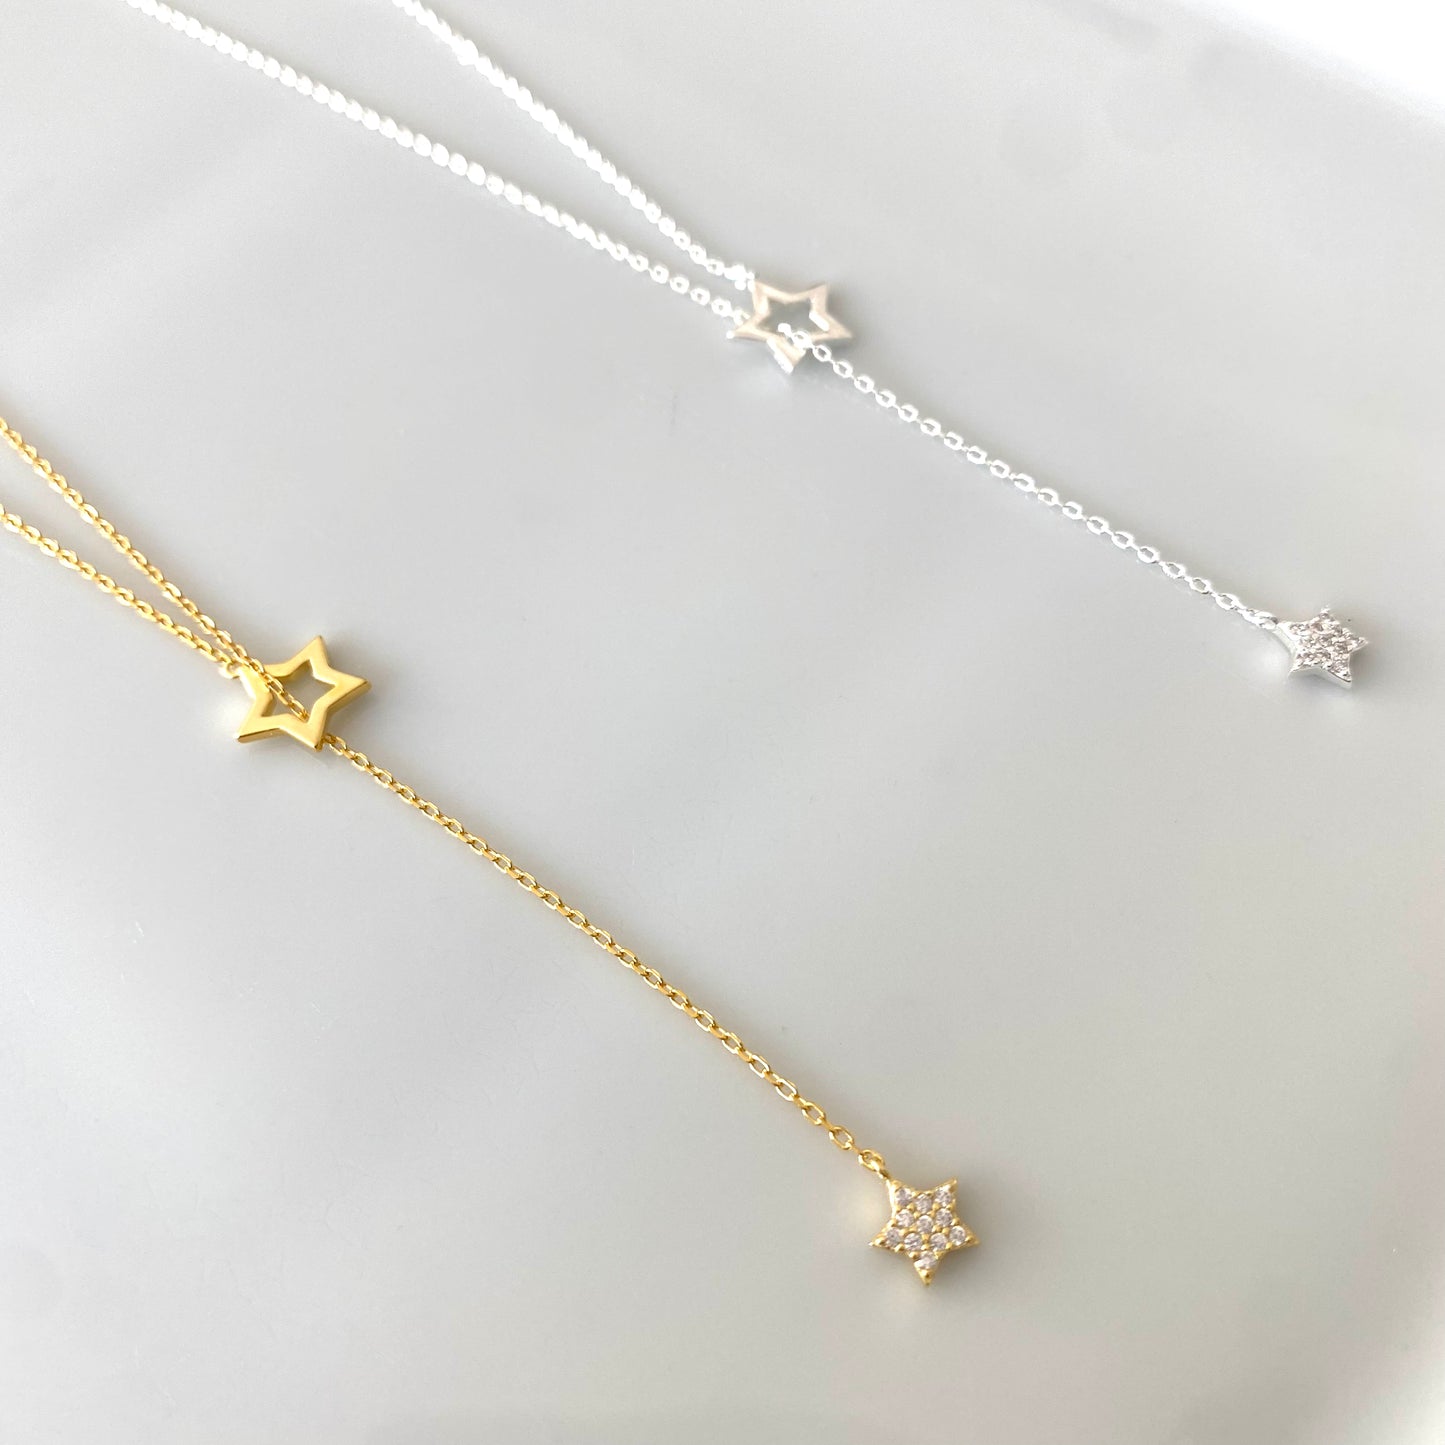 Lariat double star necklace